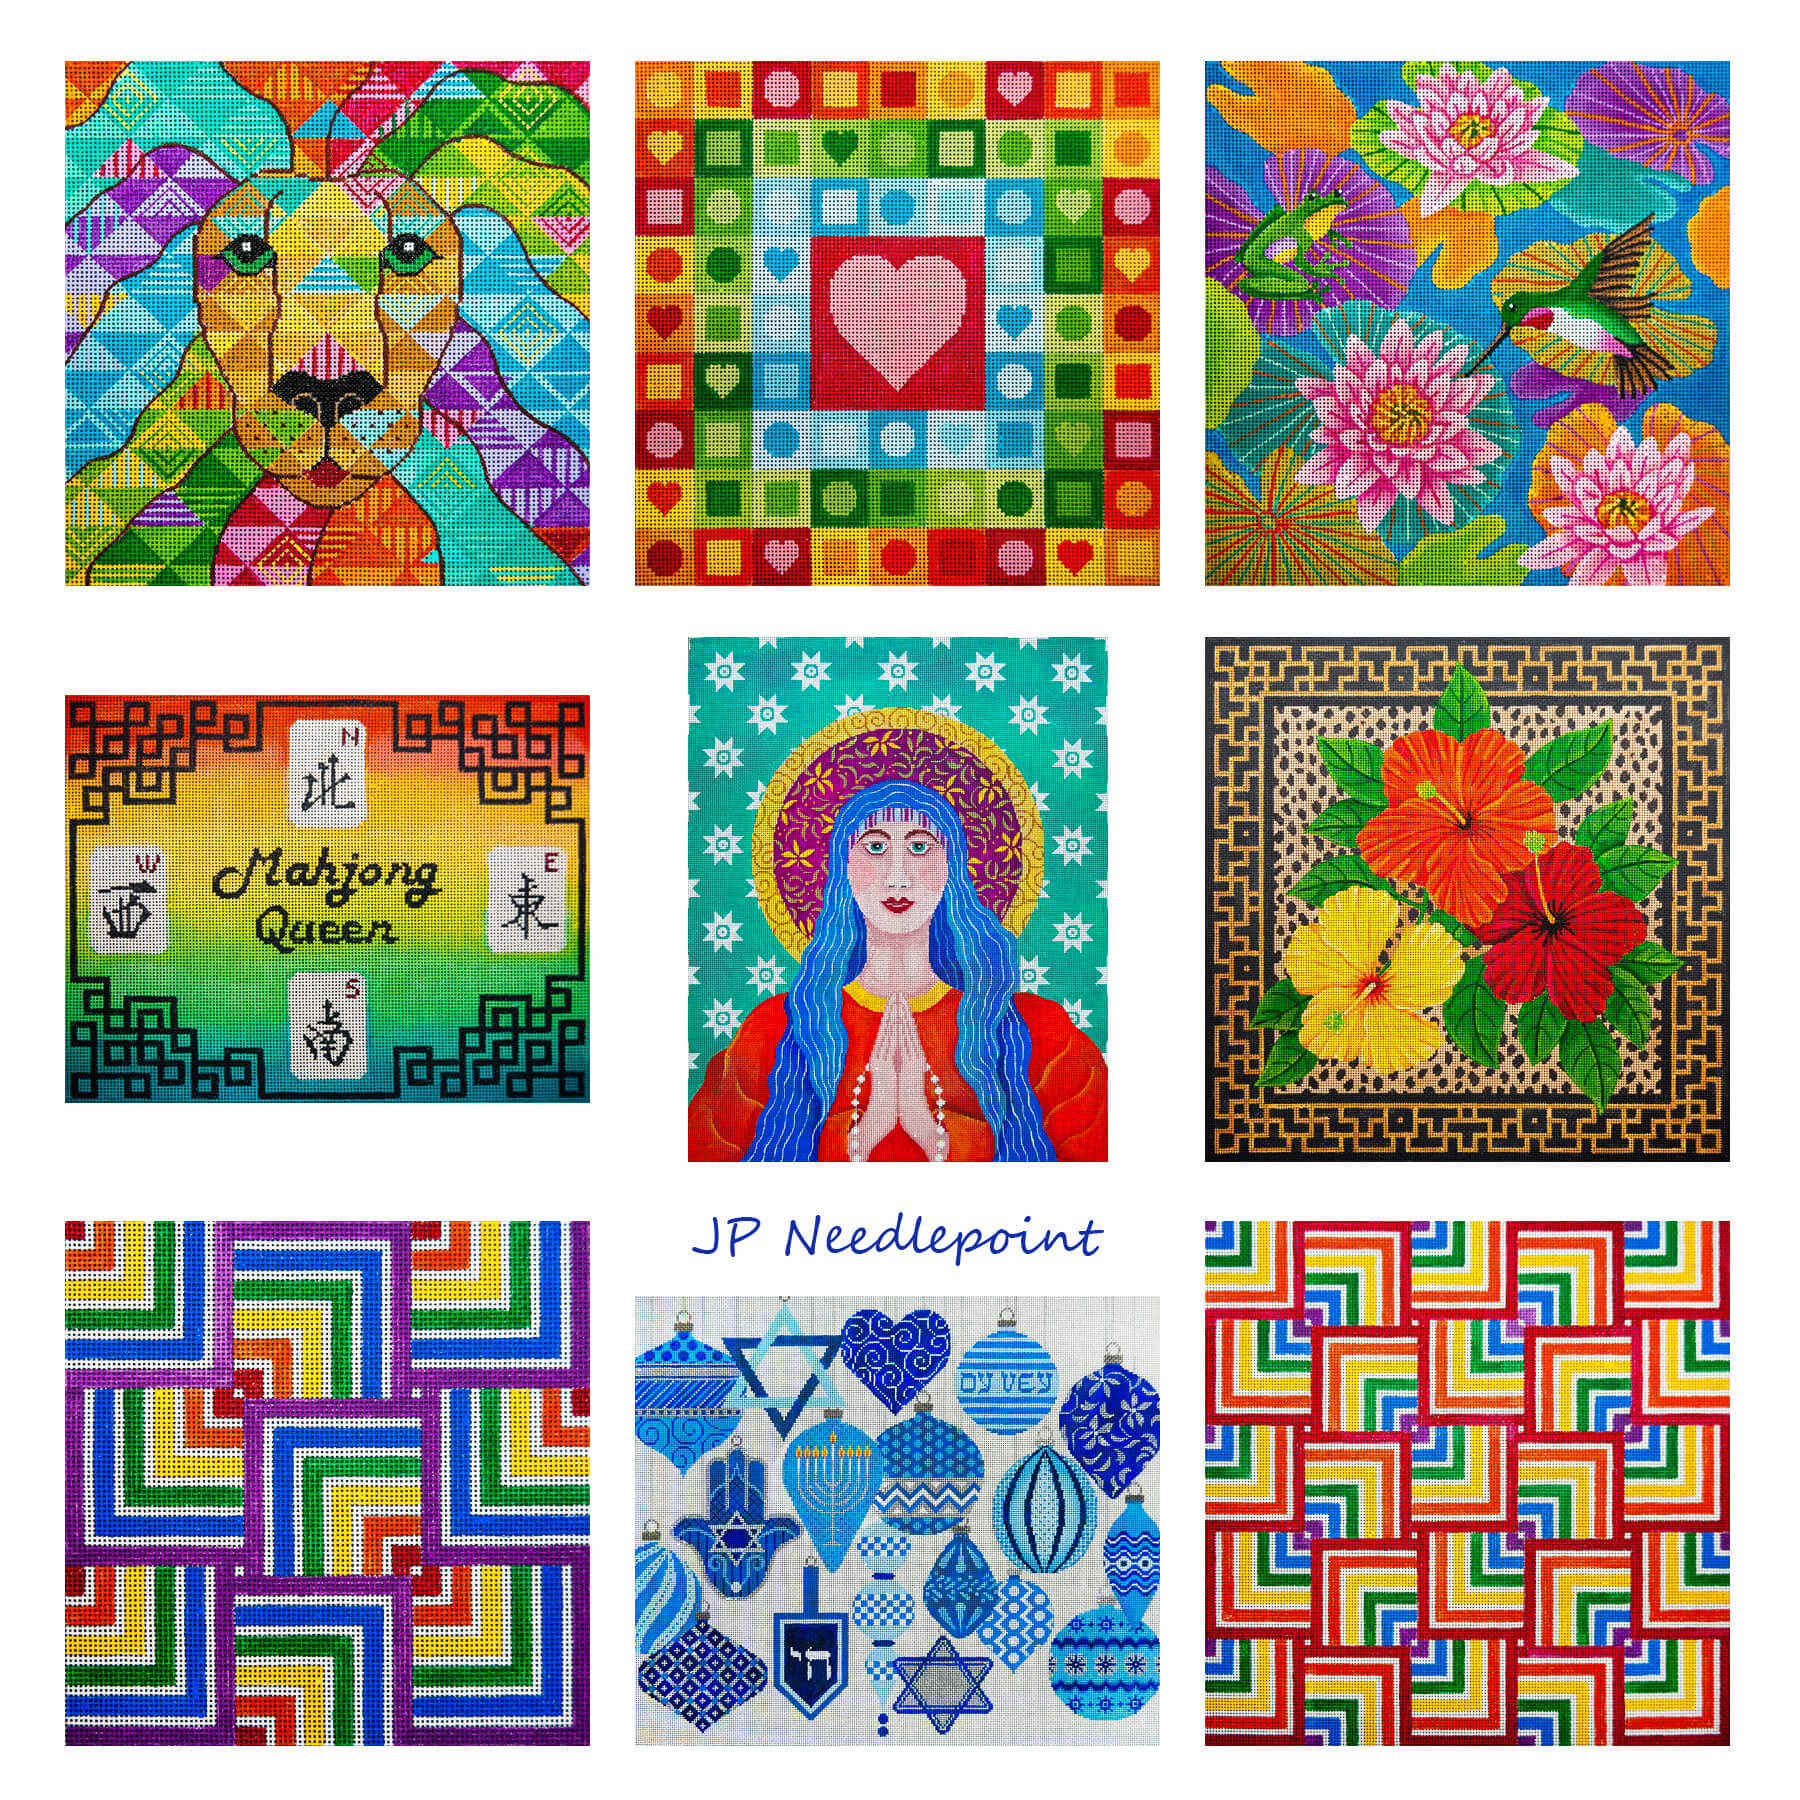 Collage of needlepoint images